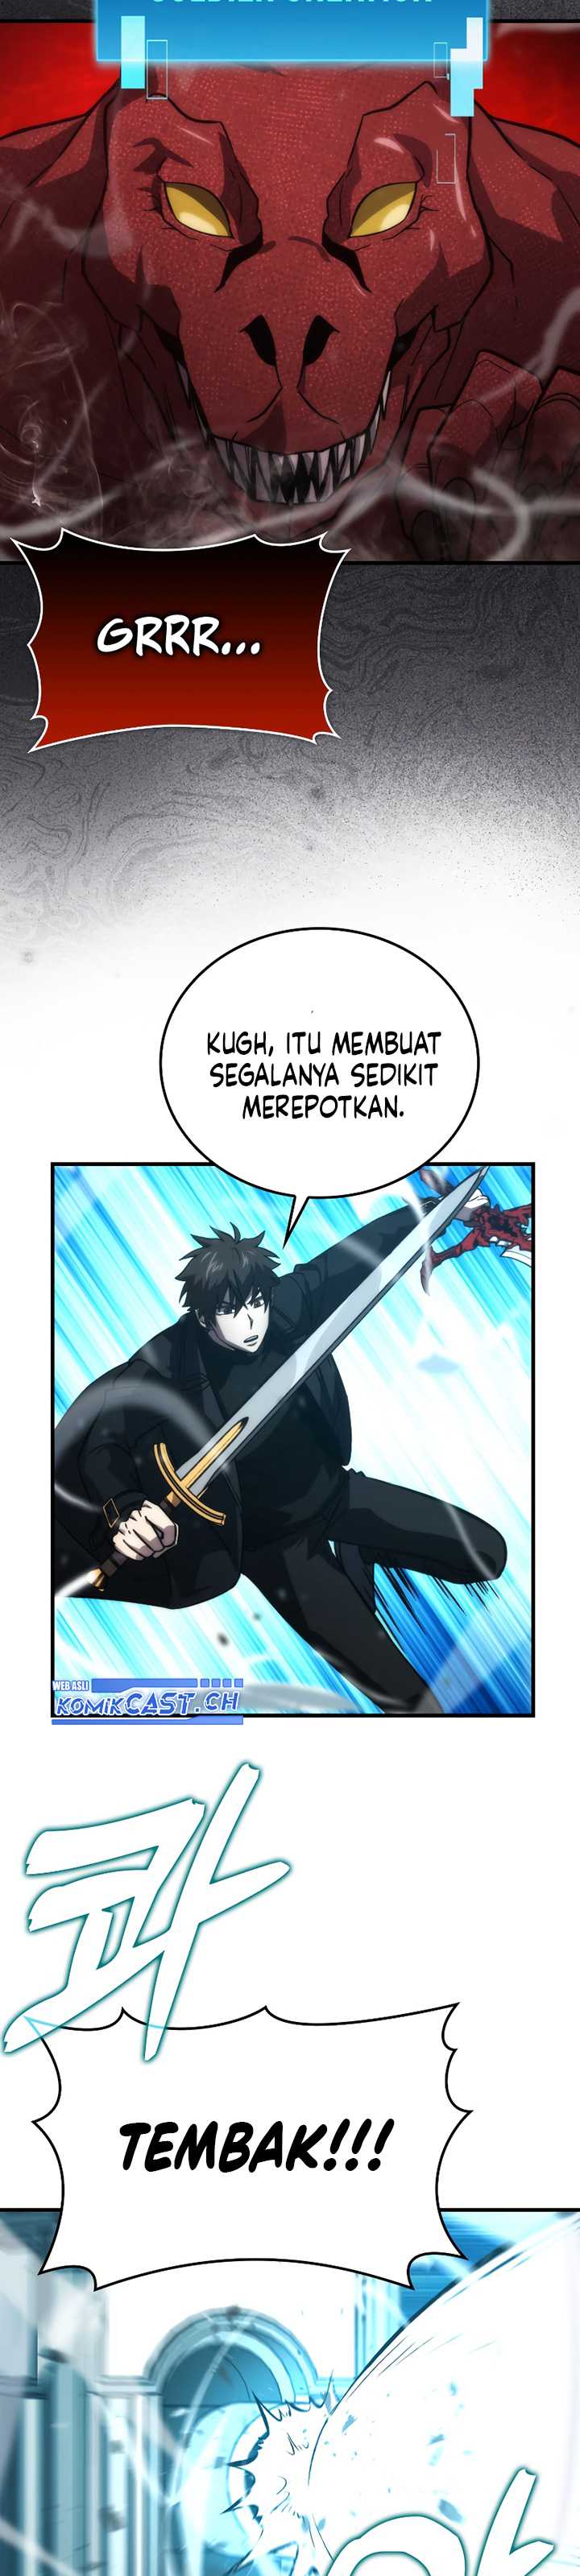 Demon Lord’s Martial Arts Ascension Chapter 58